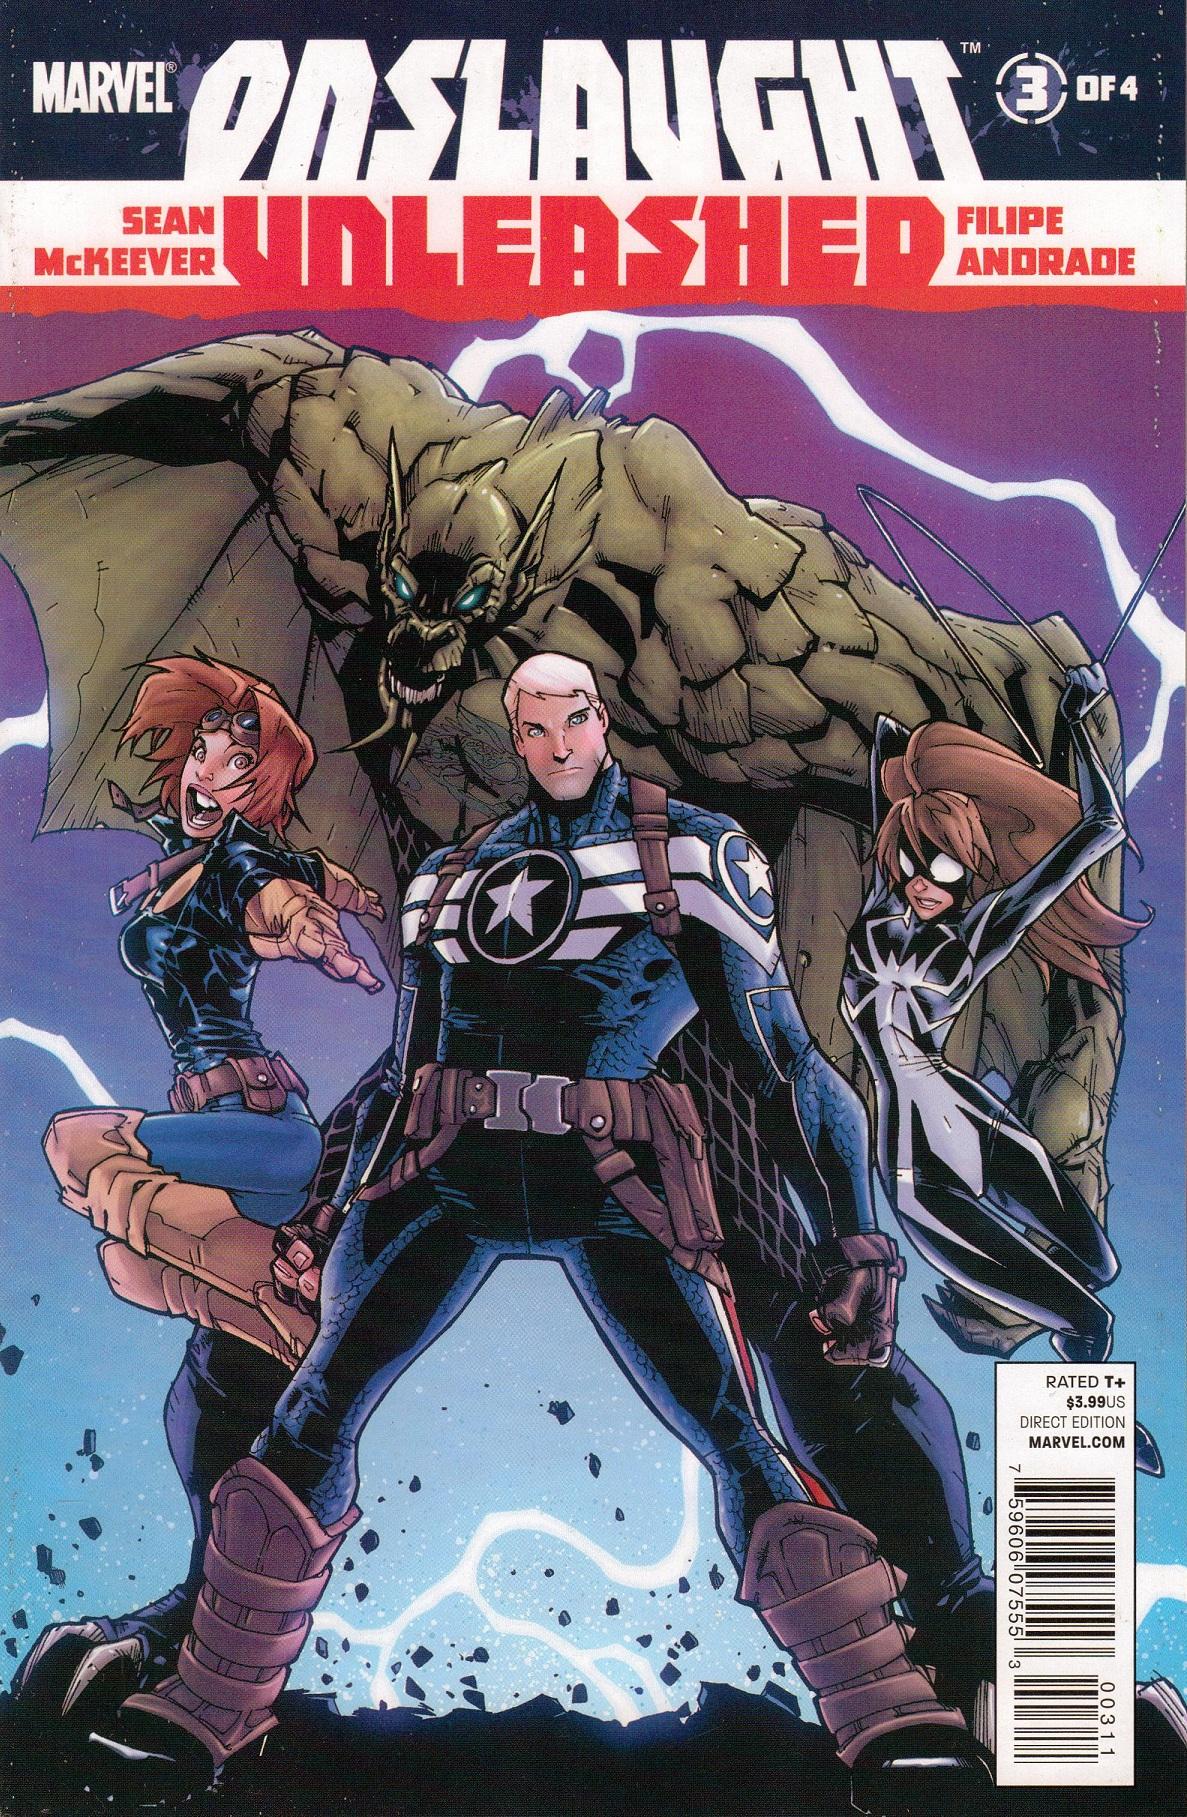 Onslaught Unleashed Vol. 1 #3